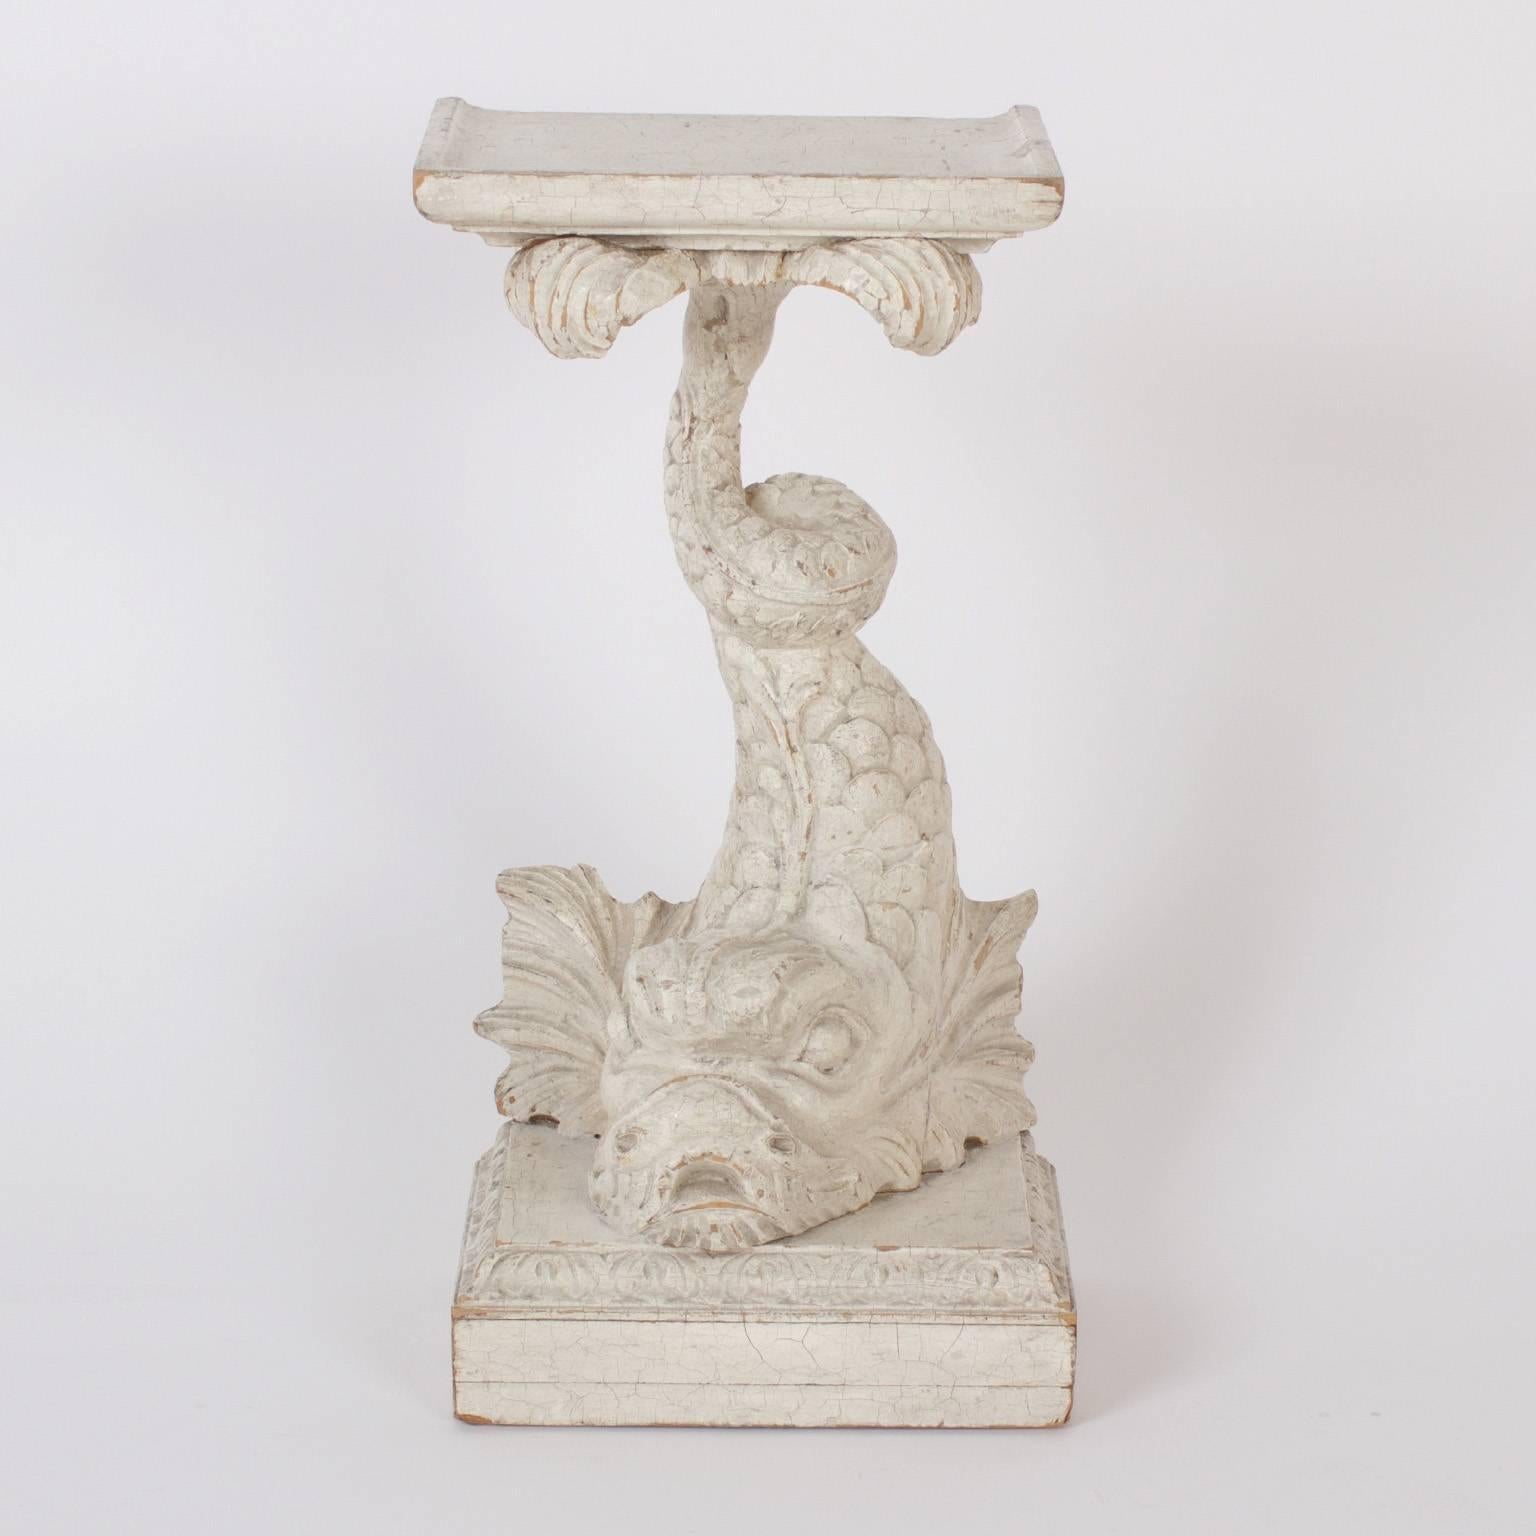 Antique carved wood drink stands or tables depicting mythological dolphin like sea creatures, in service supporting trays and mounted on classical plinths. Retaining their original paint which has acquired a charming aged finish.